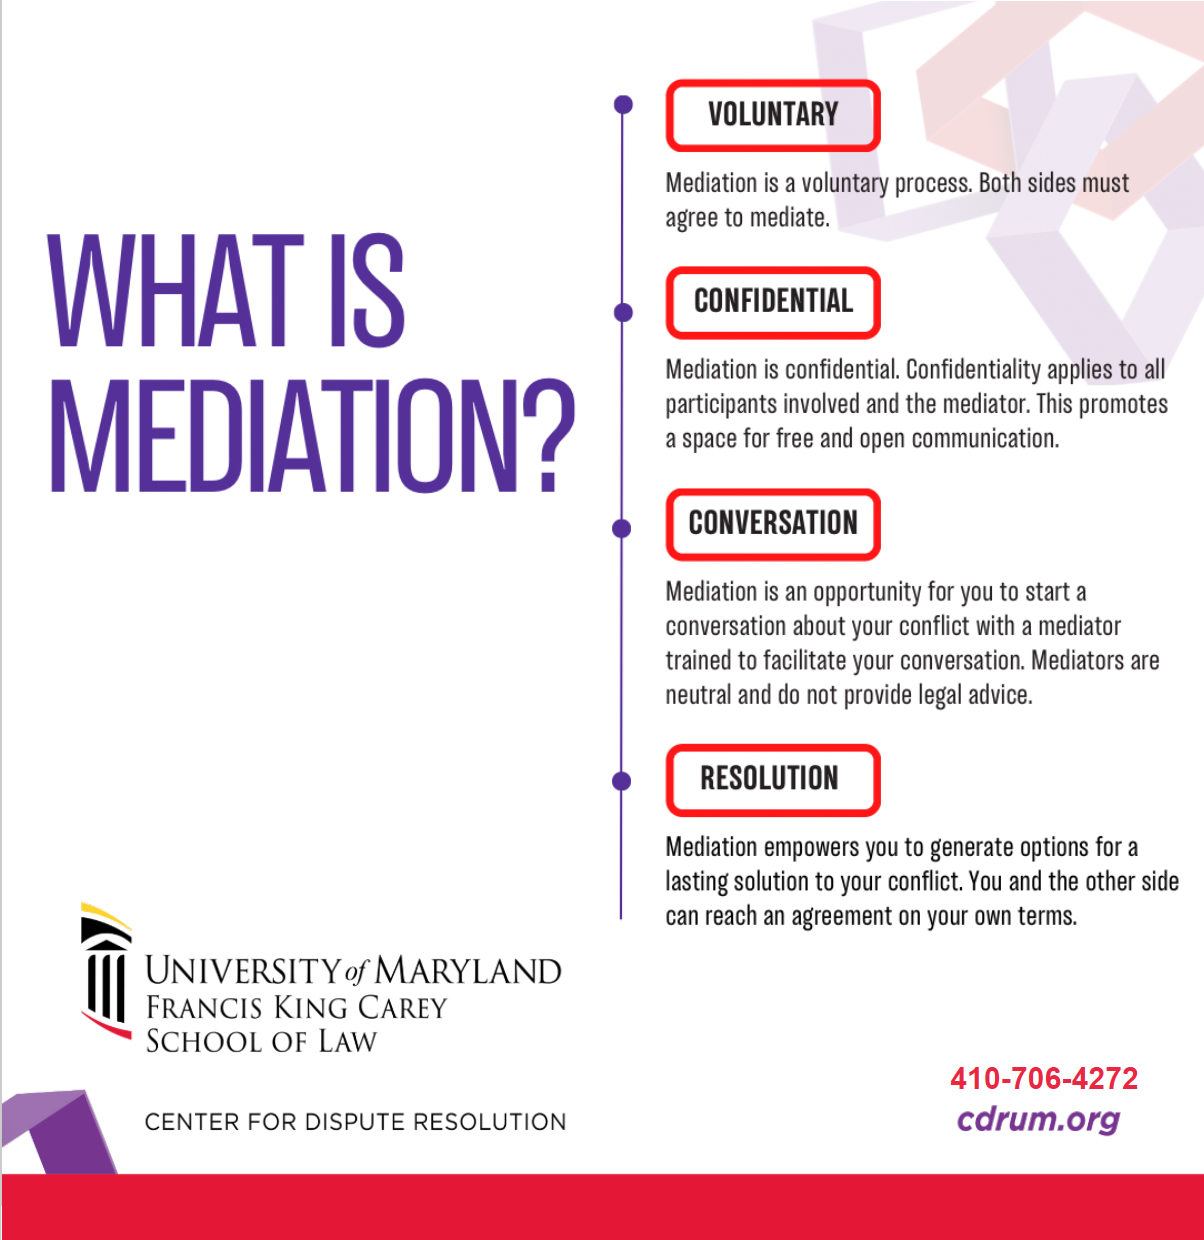 What is Mediation in Billing and Why use Automated Mediation?